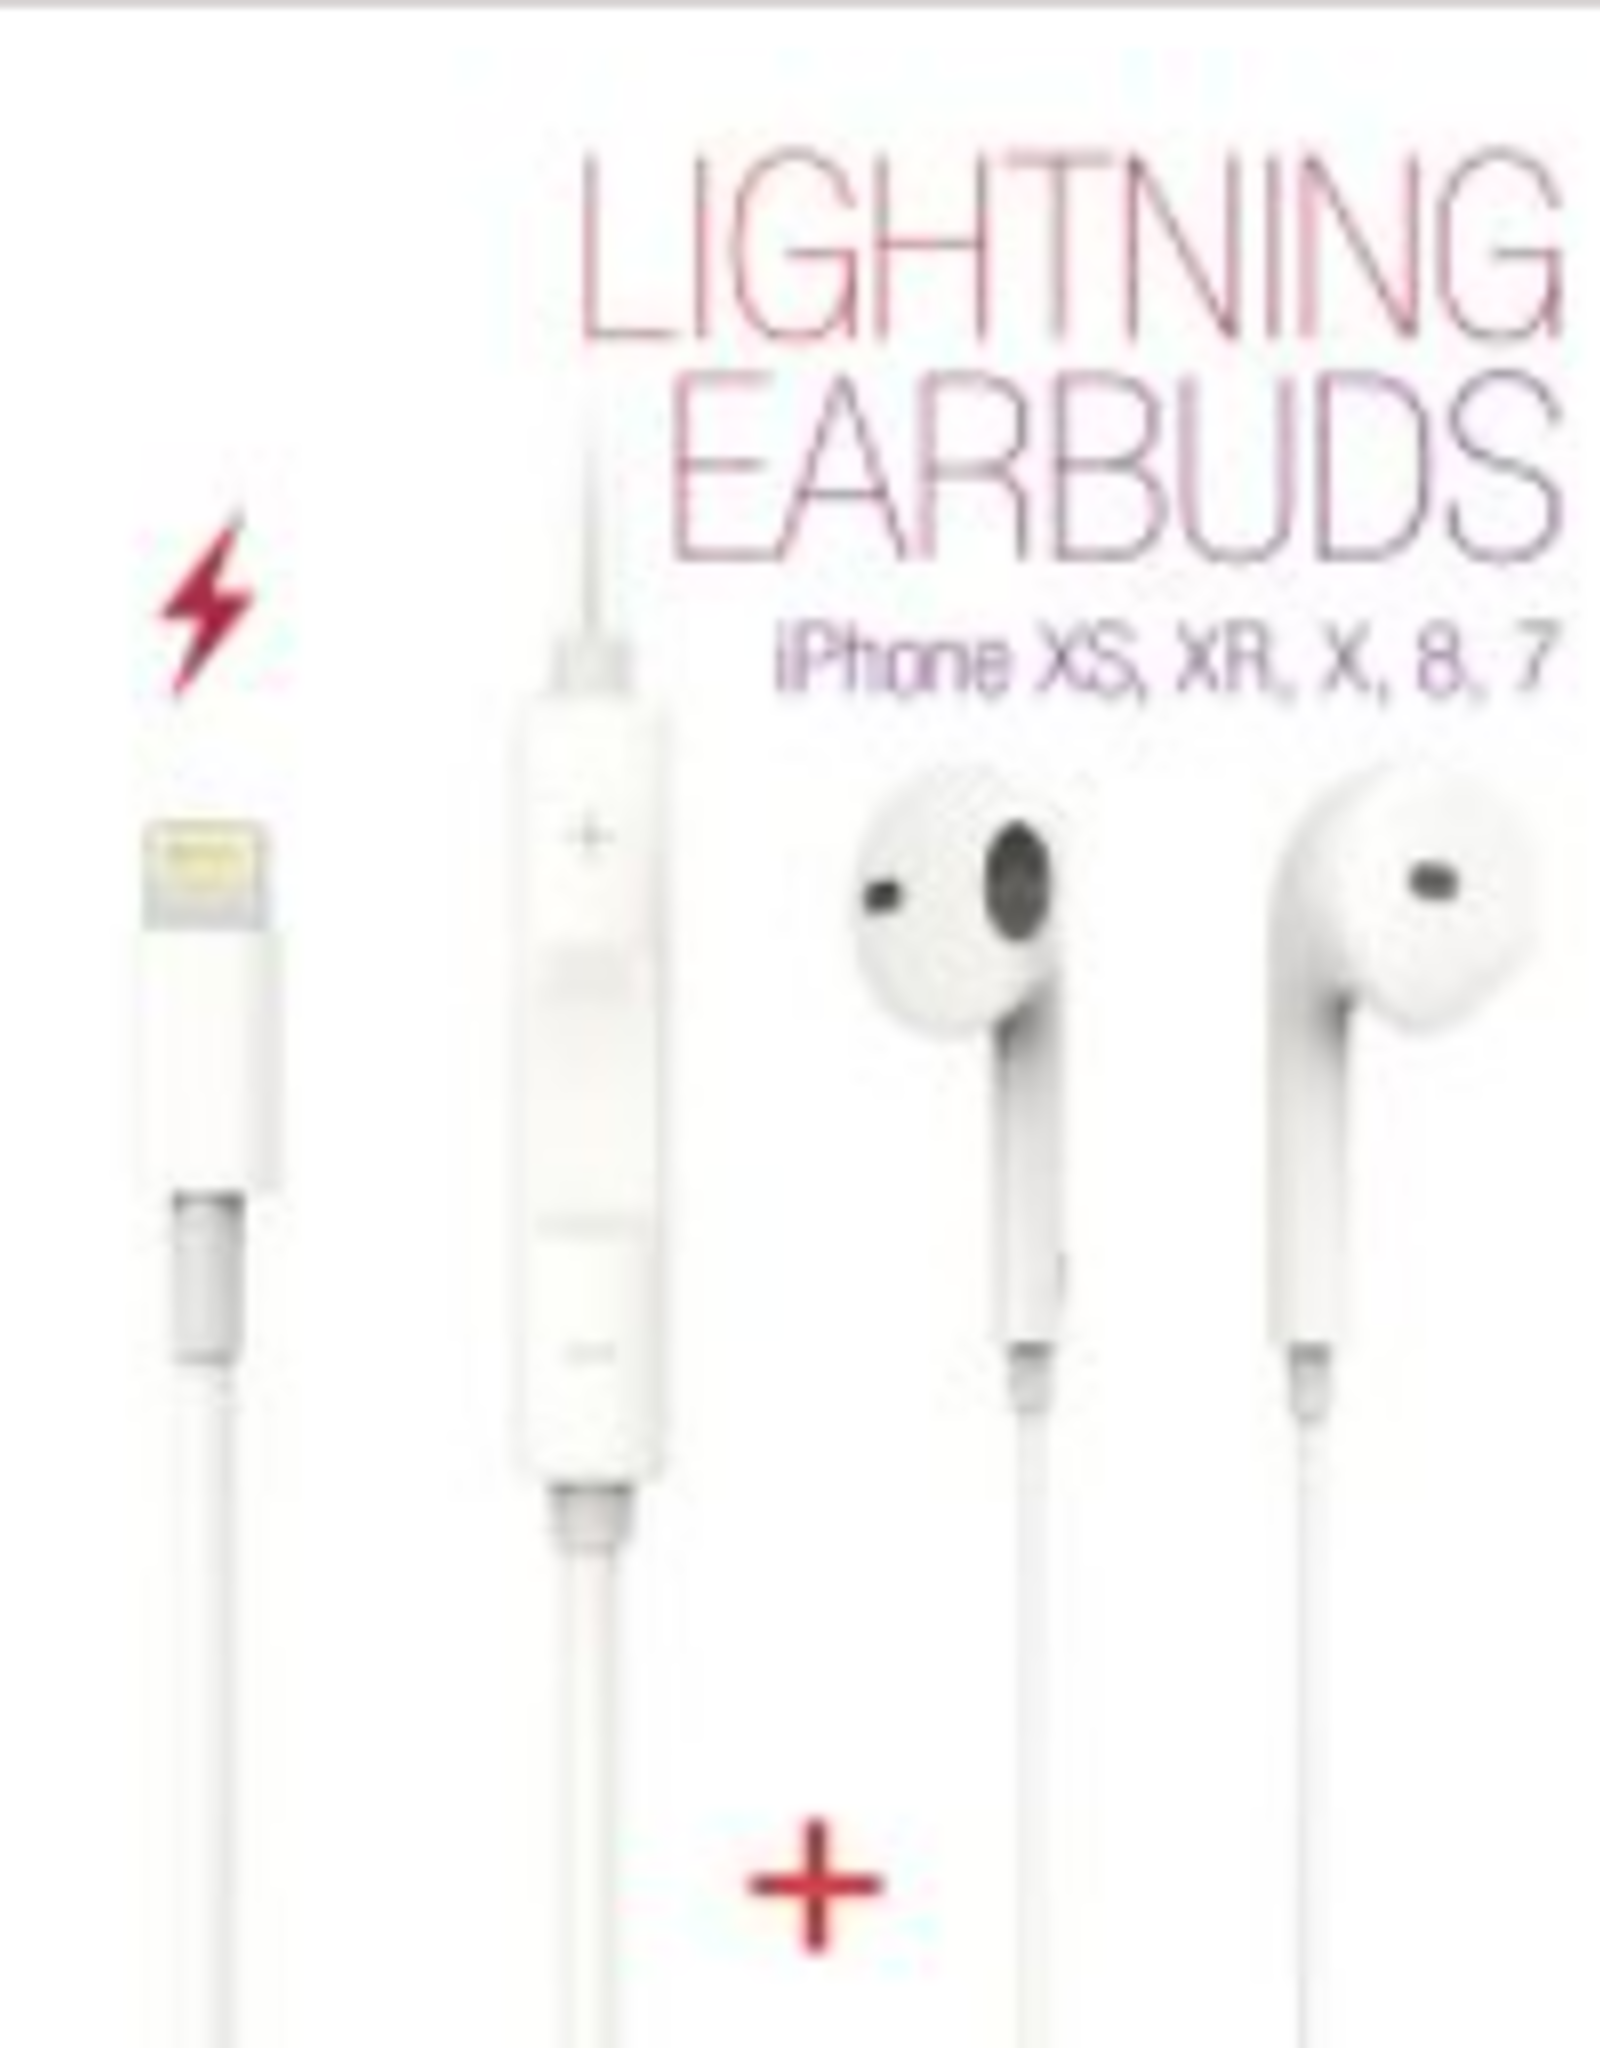 Lightning Compatible White Earbuds with Remote And Mic